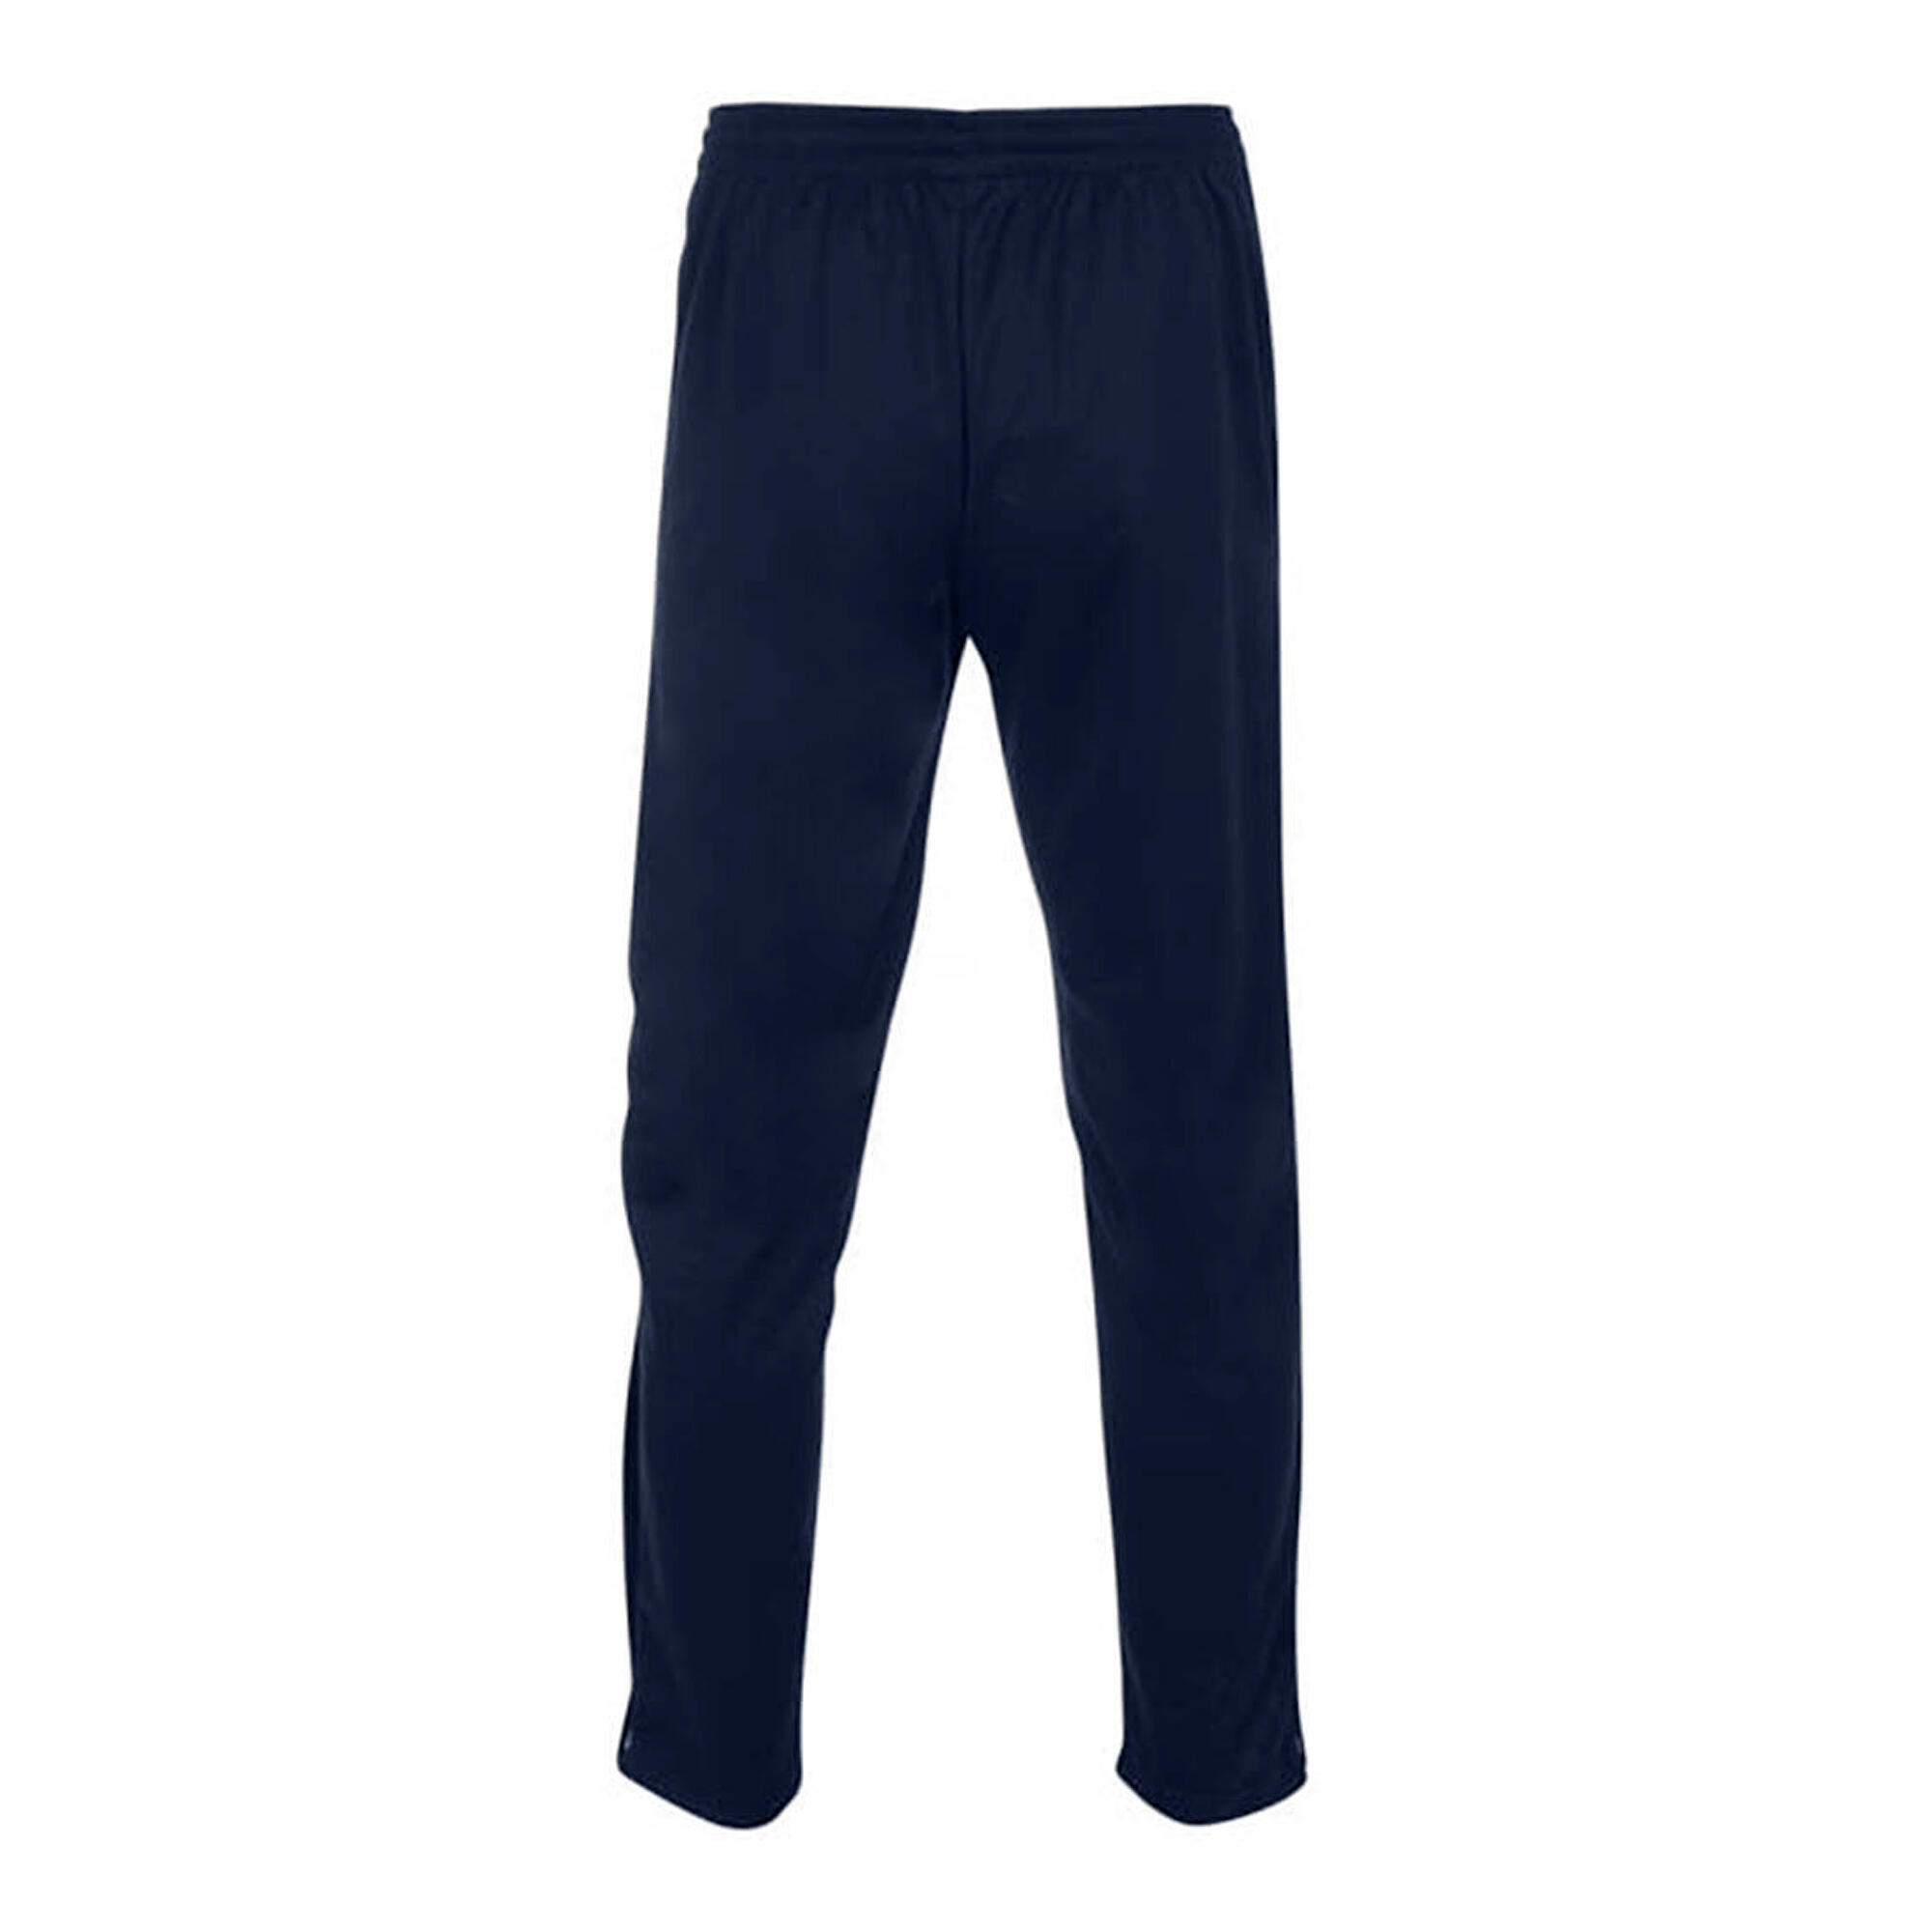 Unisex Adult Stretch Tapered Tracksuit Bottoms (Navy) 2/2